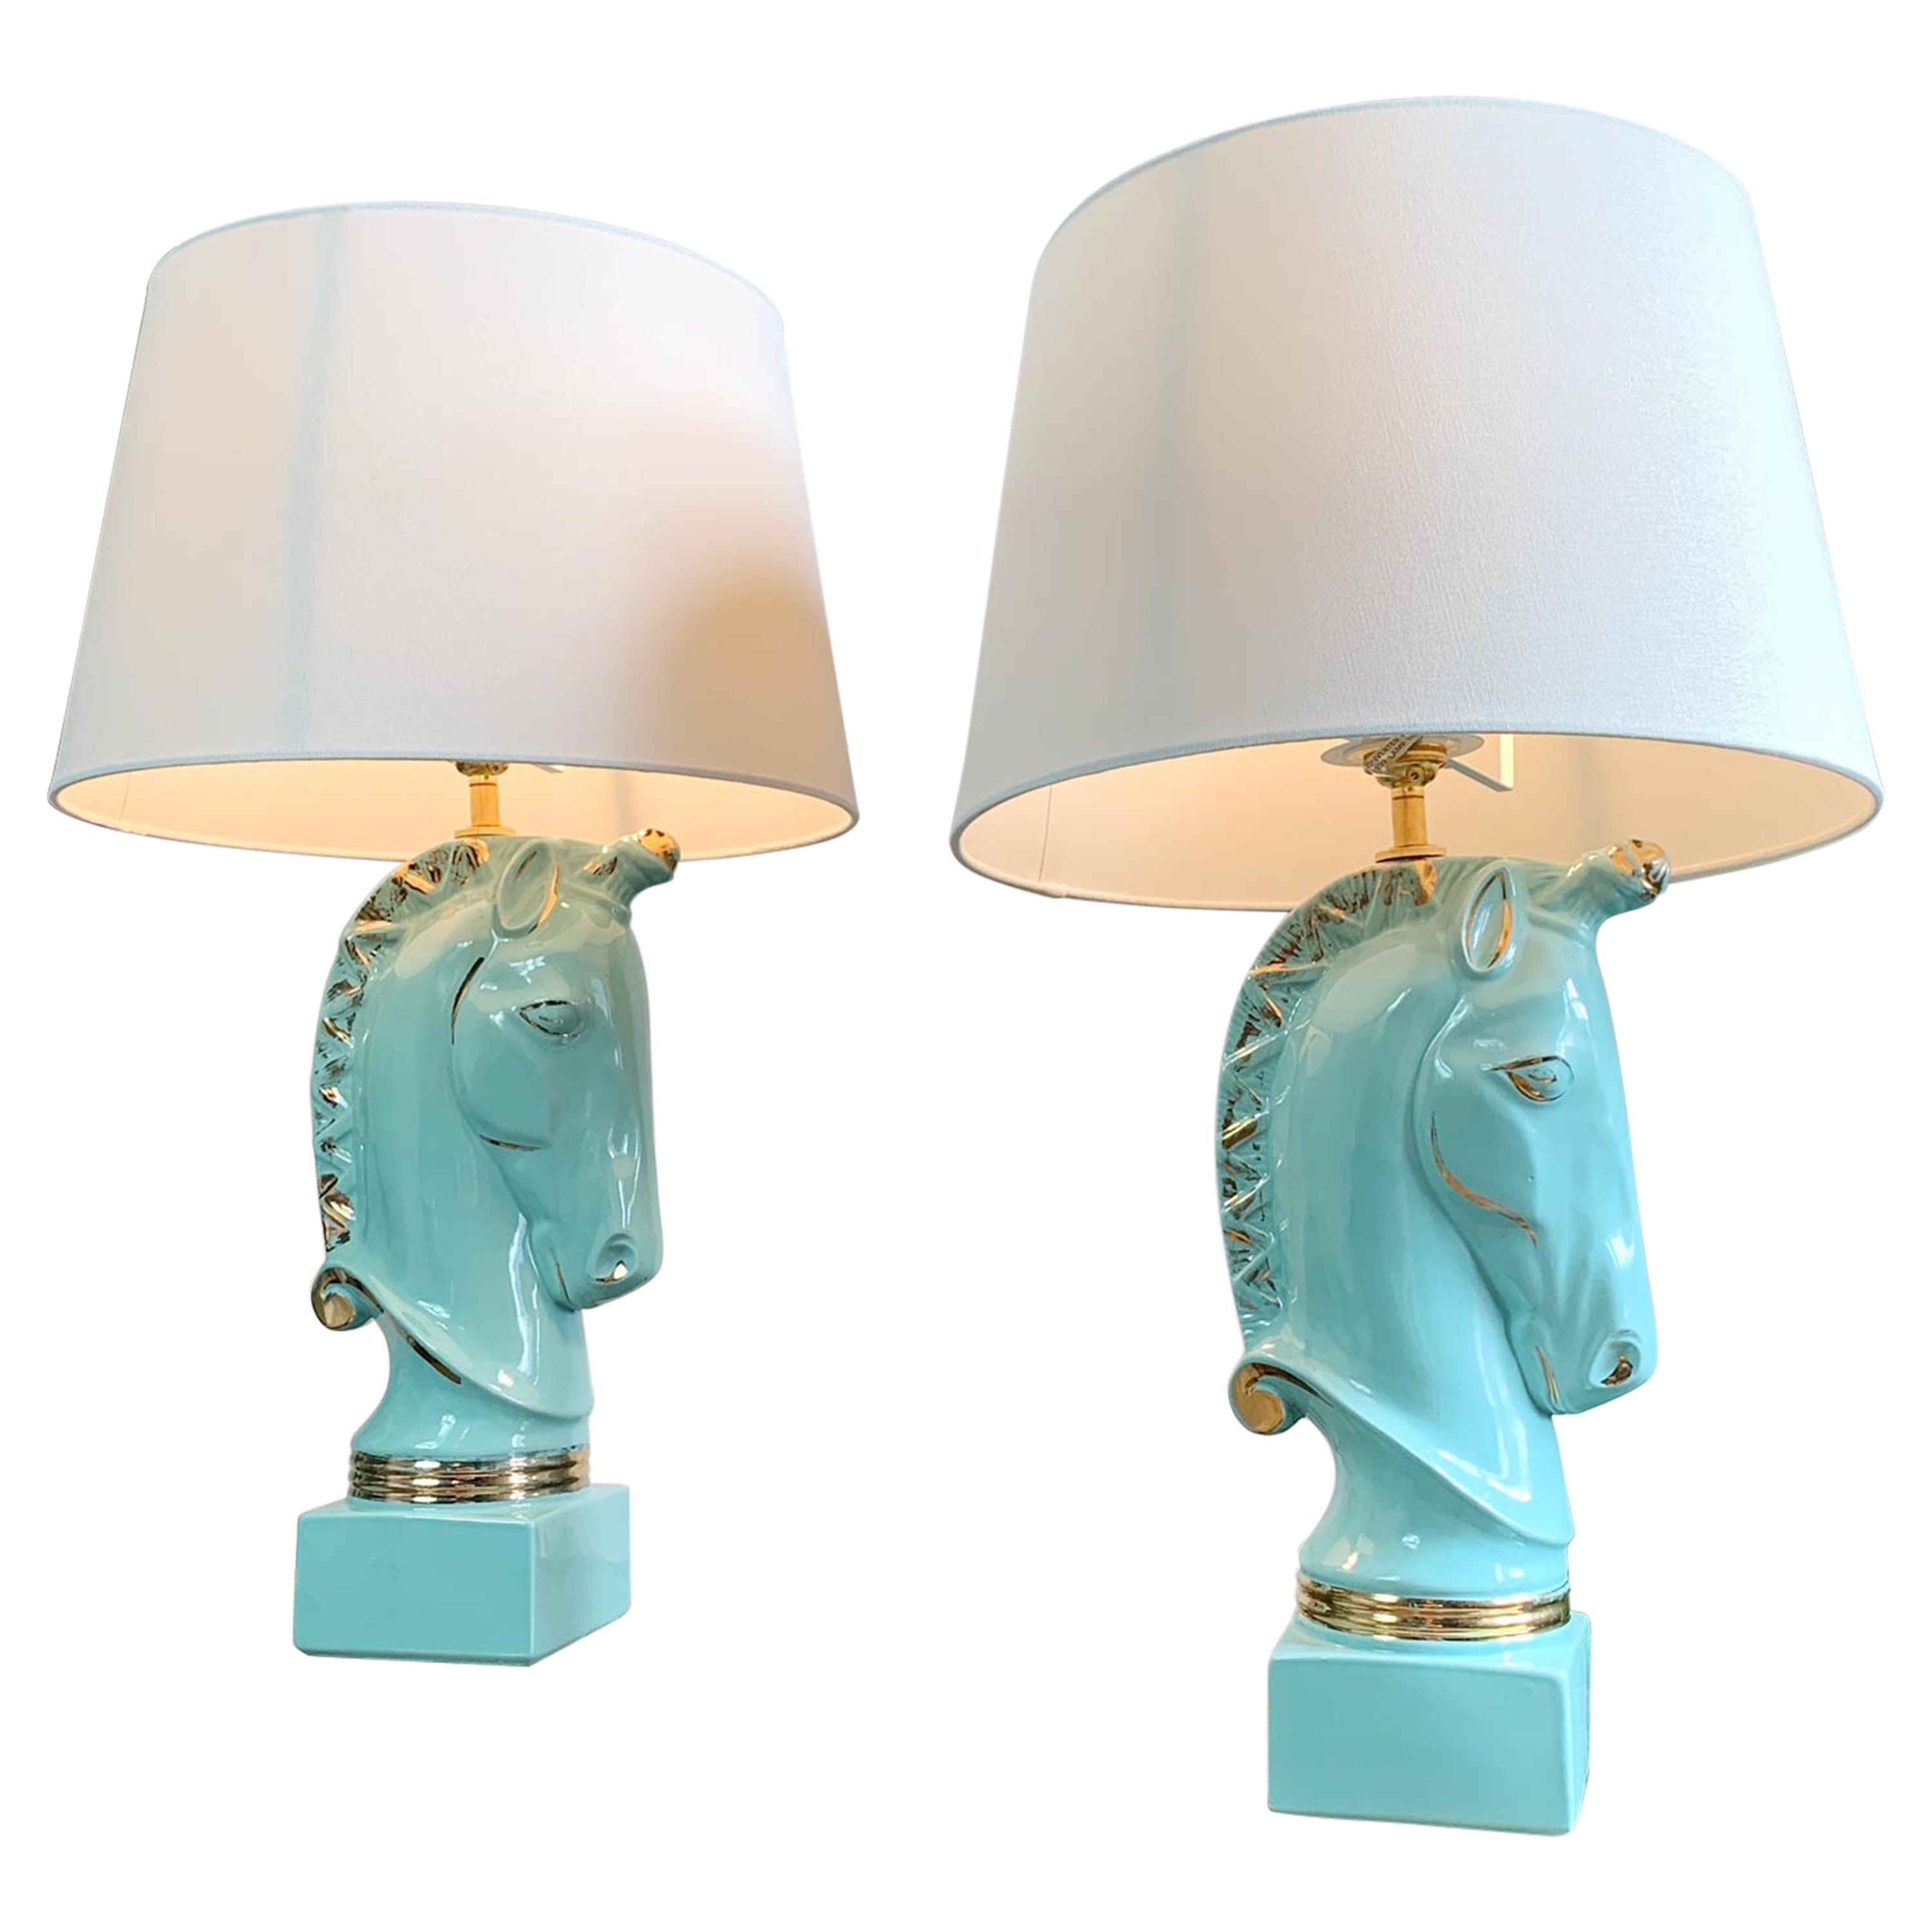 Pair of 1950’s Turquoise Blue Howell Ceramic Unicorn Lamps For Sale